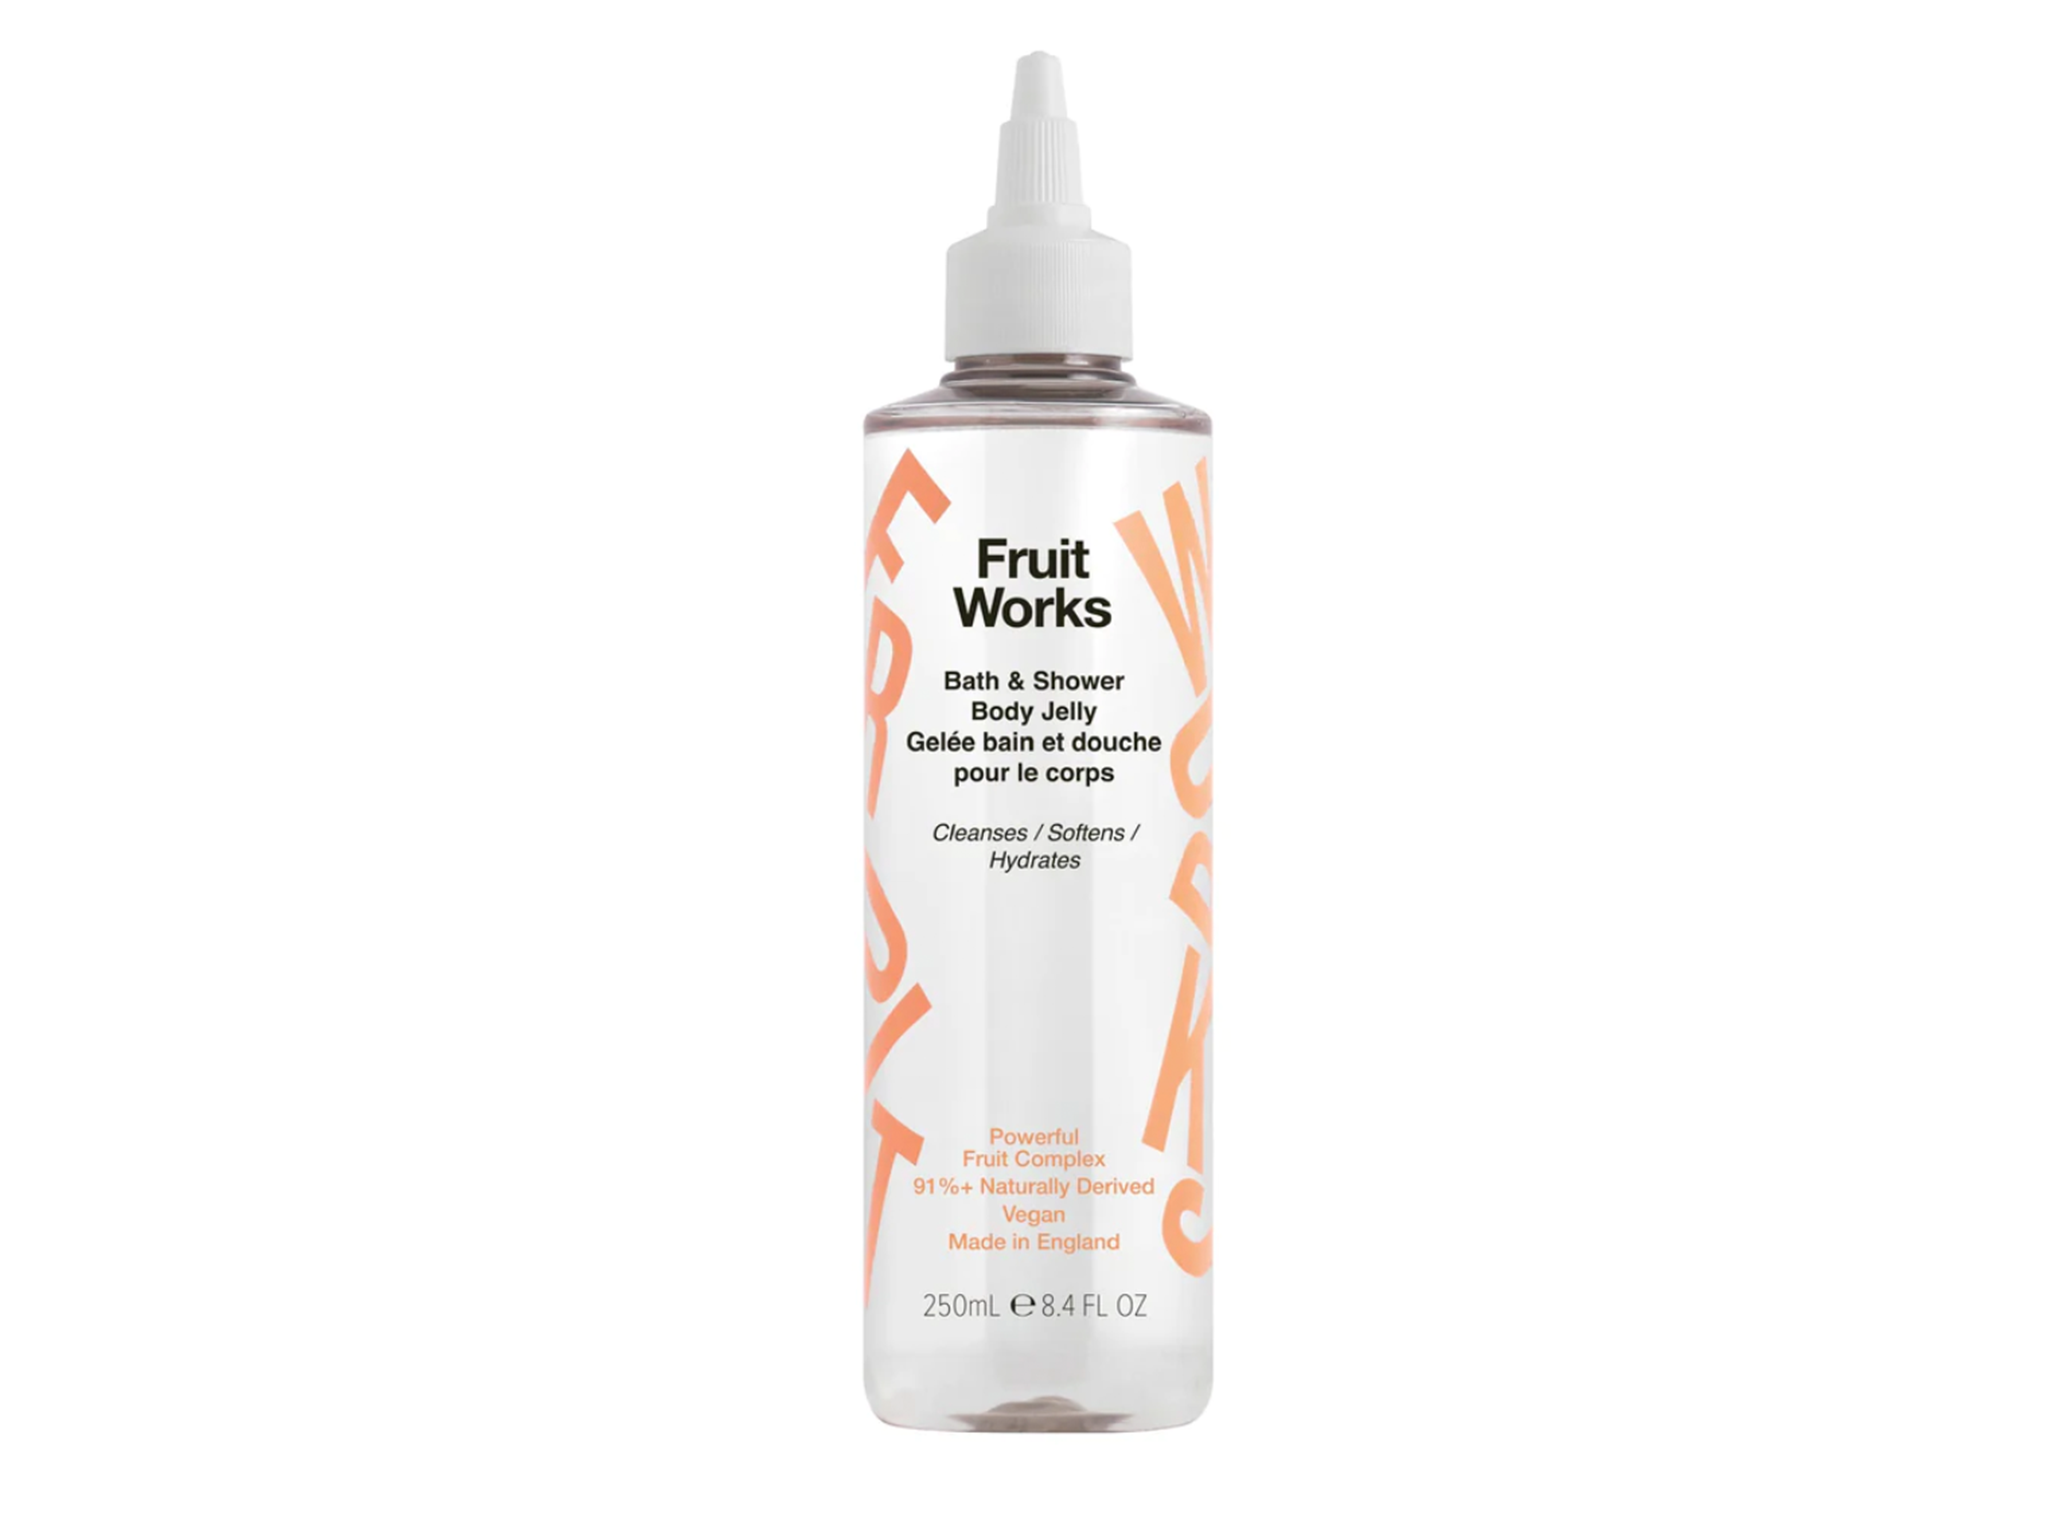 Bargain beauty buys Fruit Works bath and body shower jelly